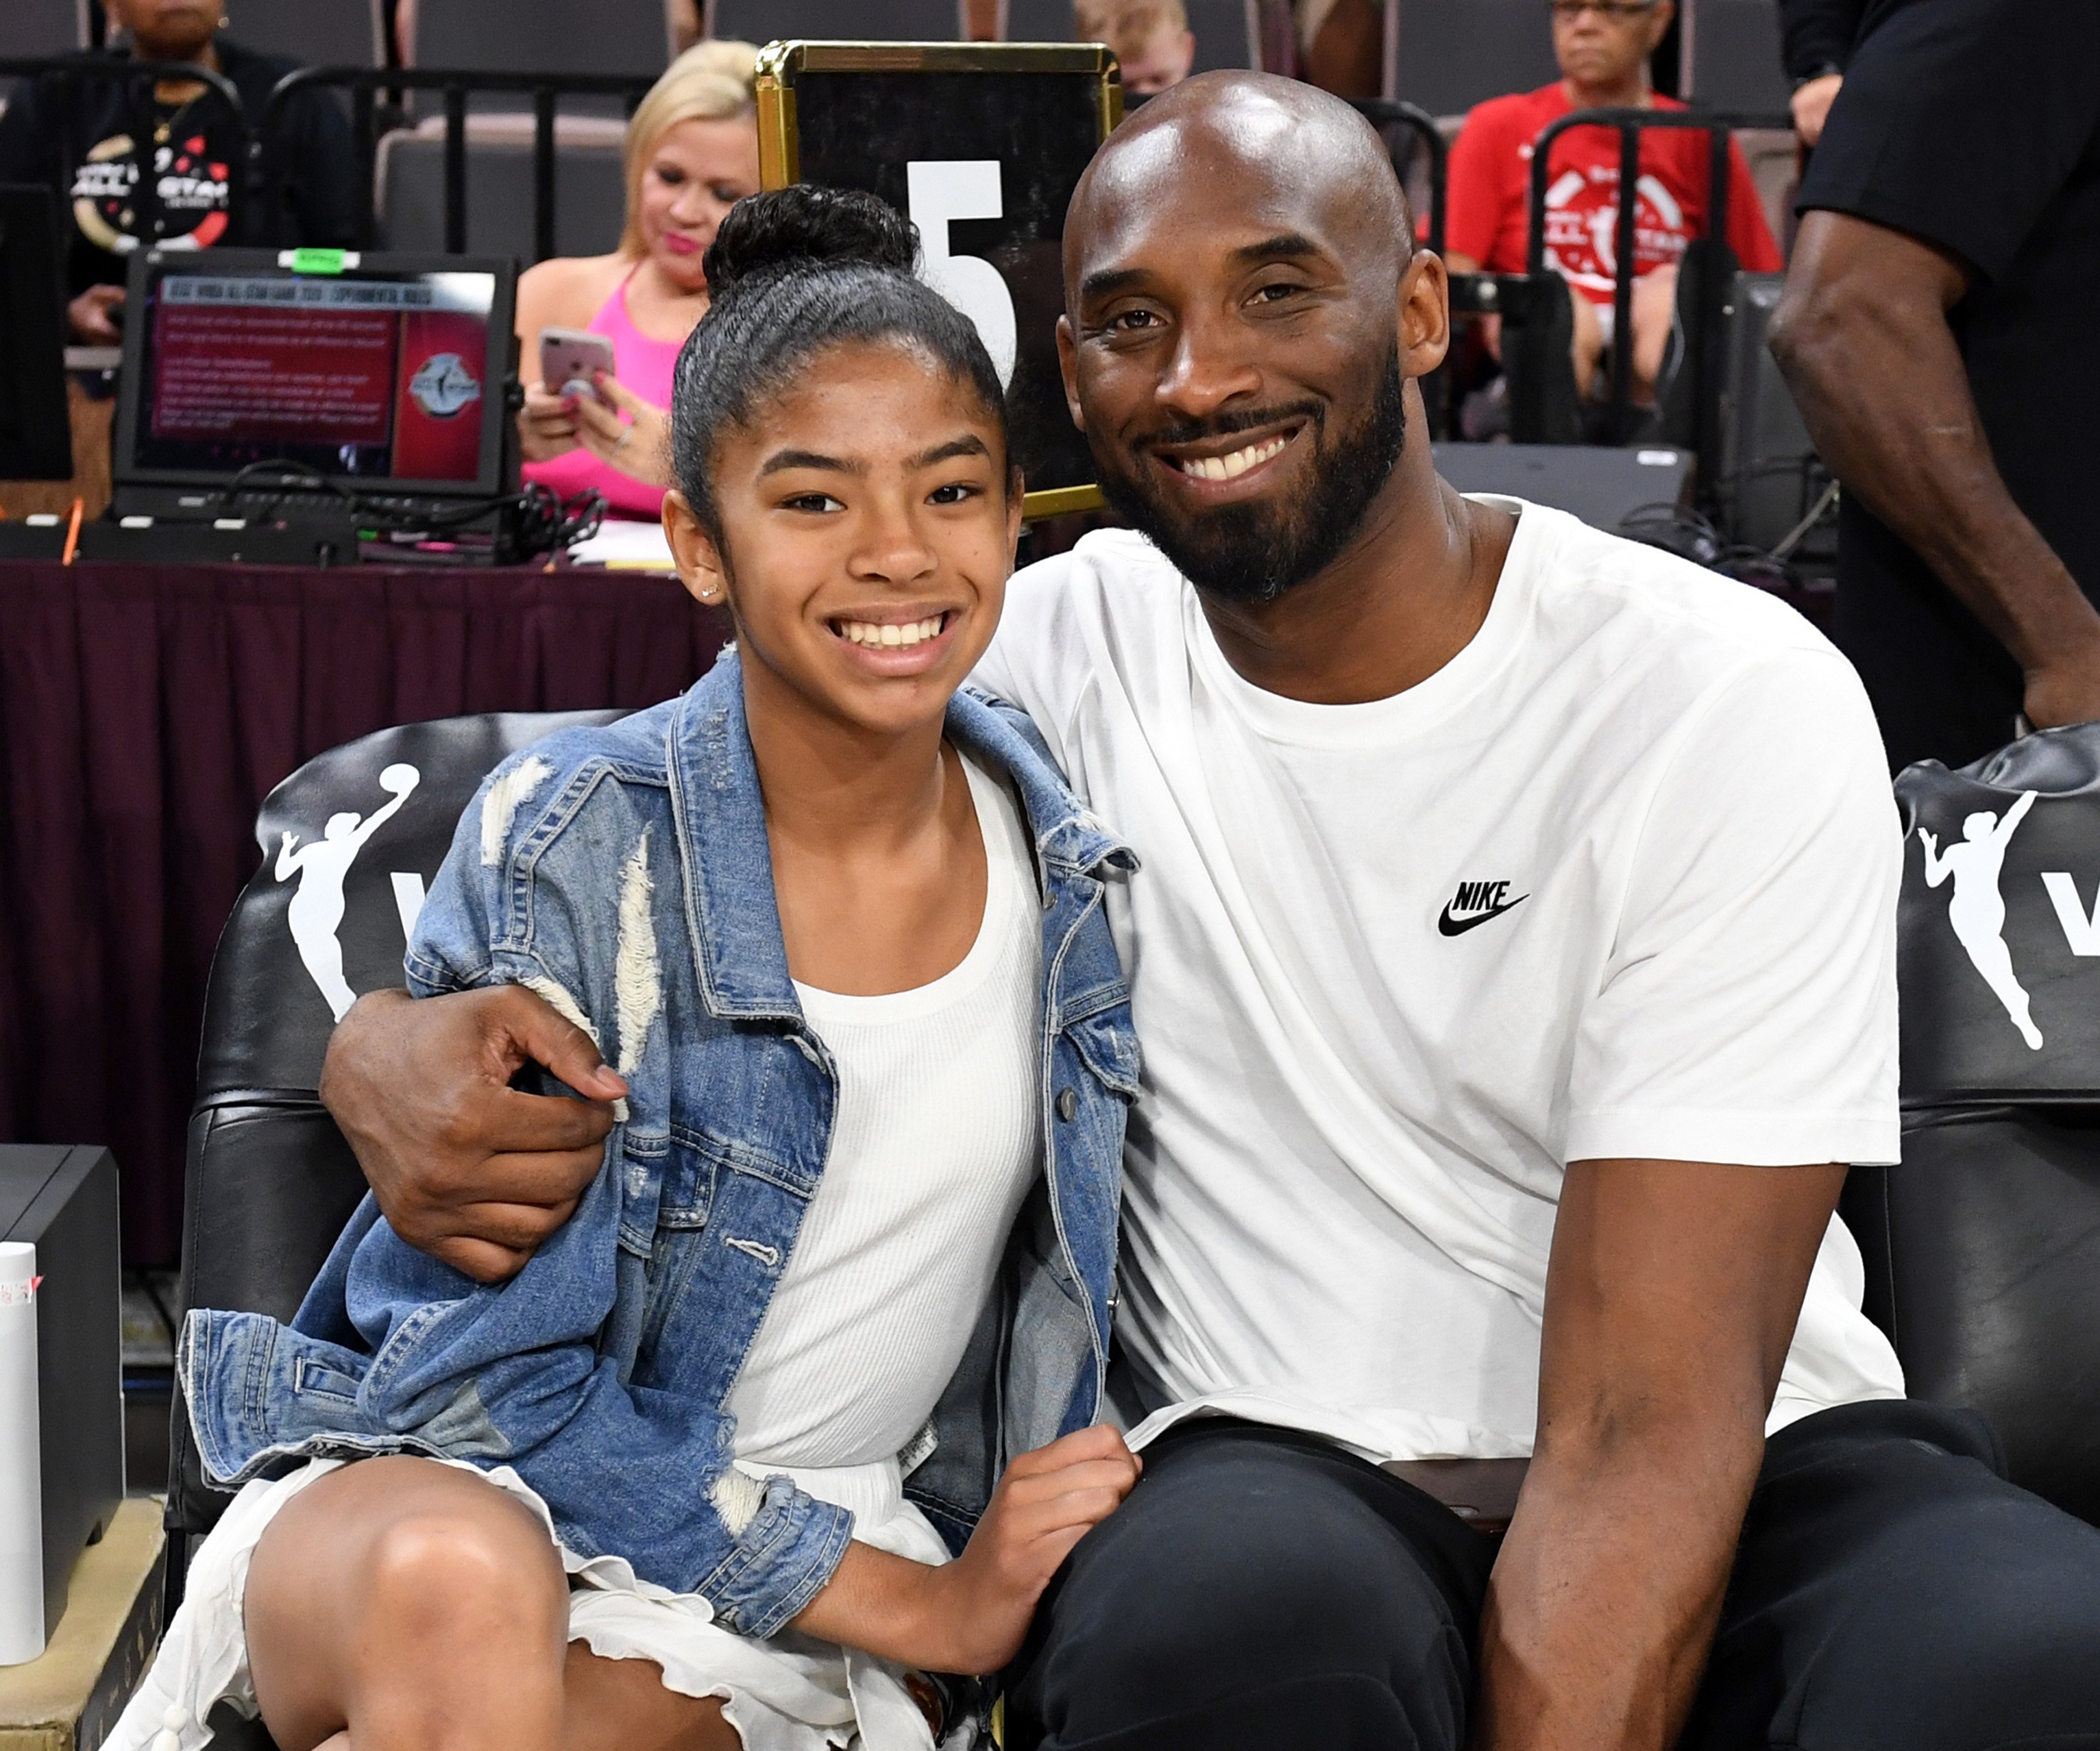 13-year-old Gianna and Kobe Bryant at the WNBA All-Star Game in July 2019. | Photo: Getty Images